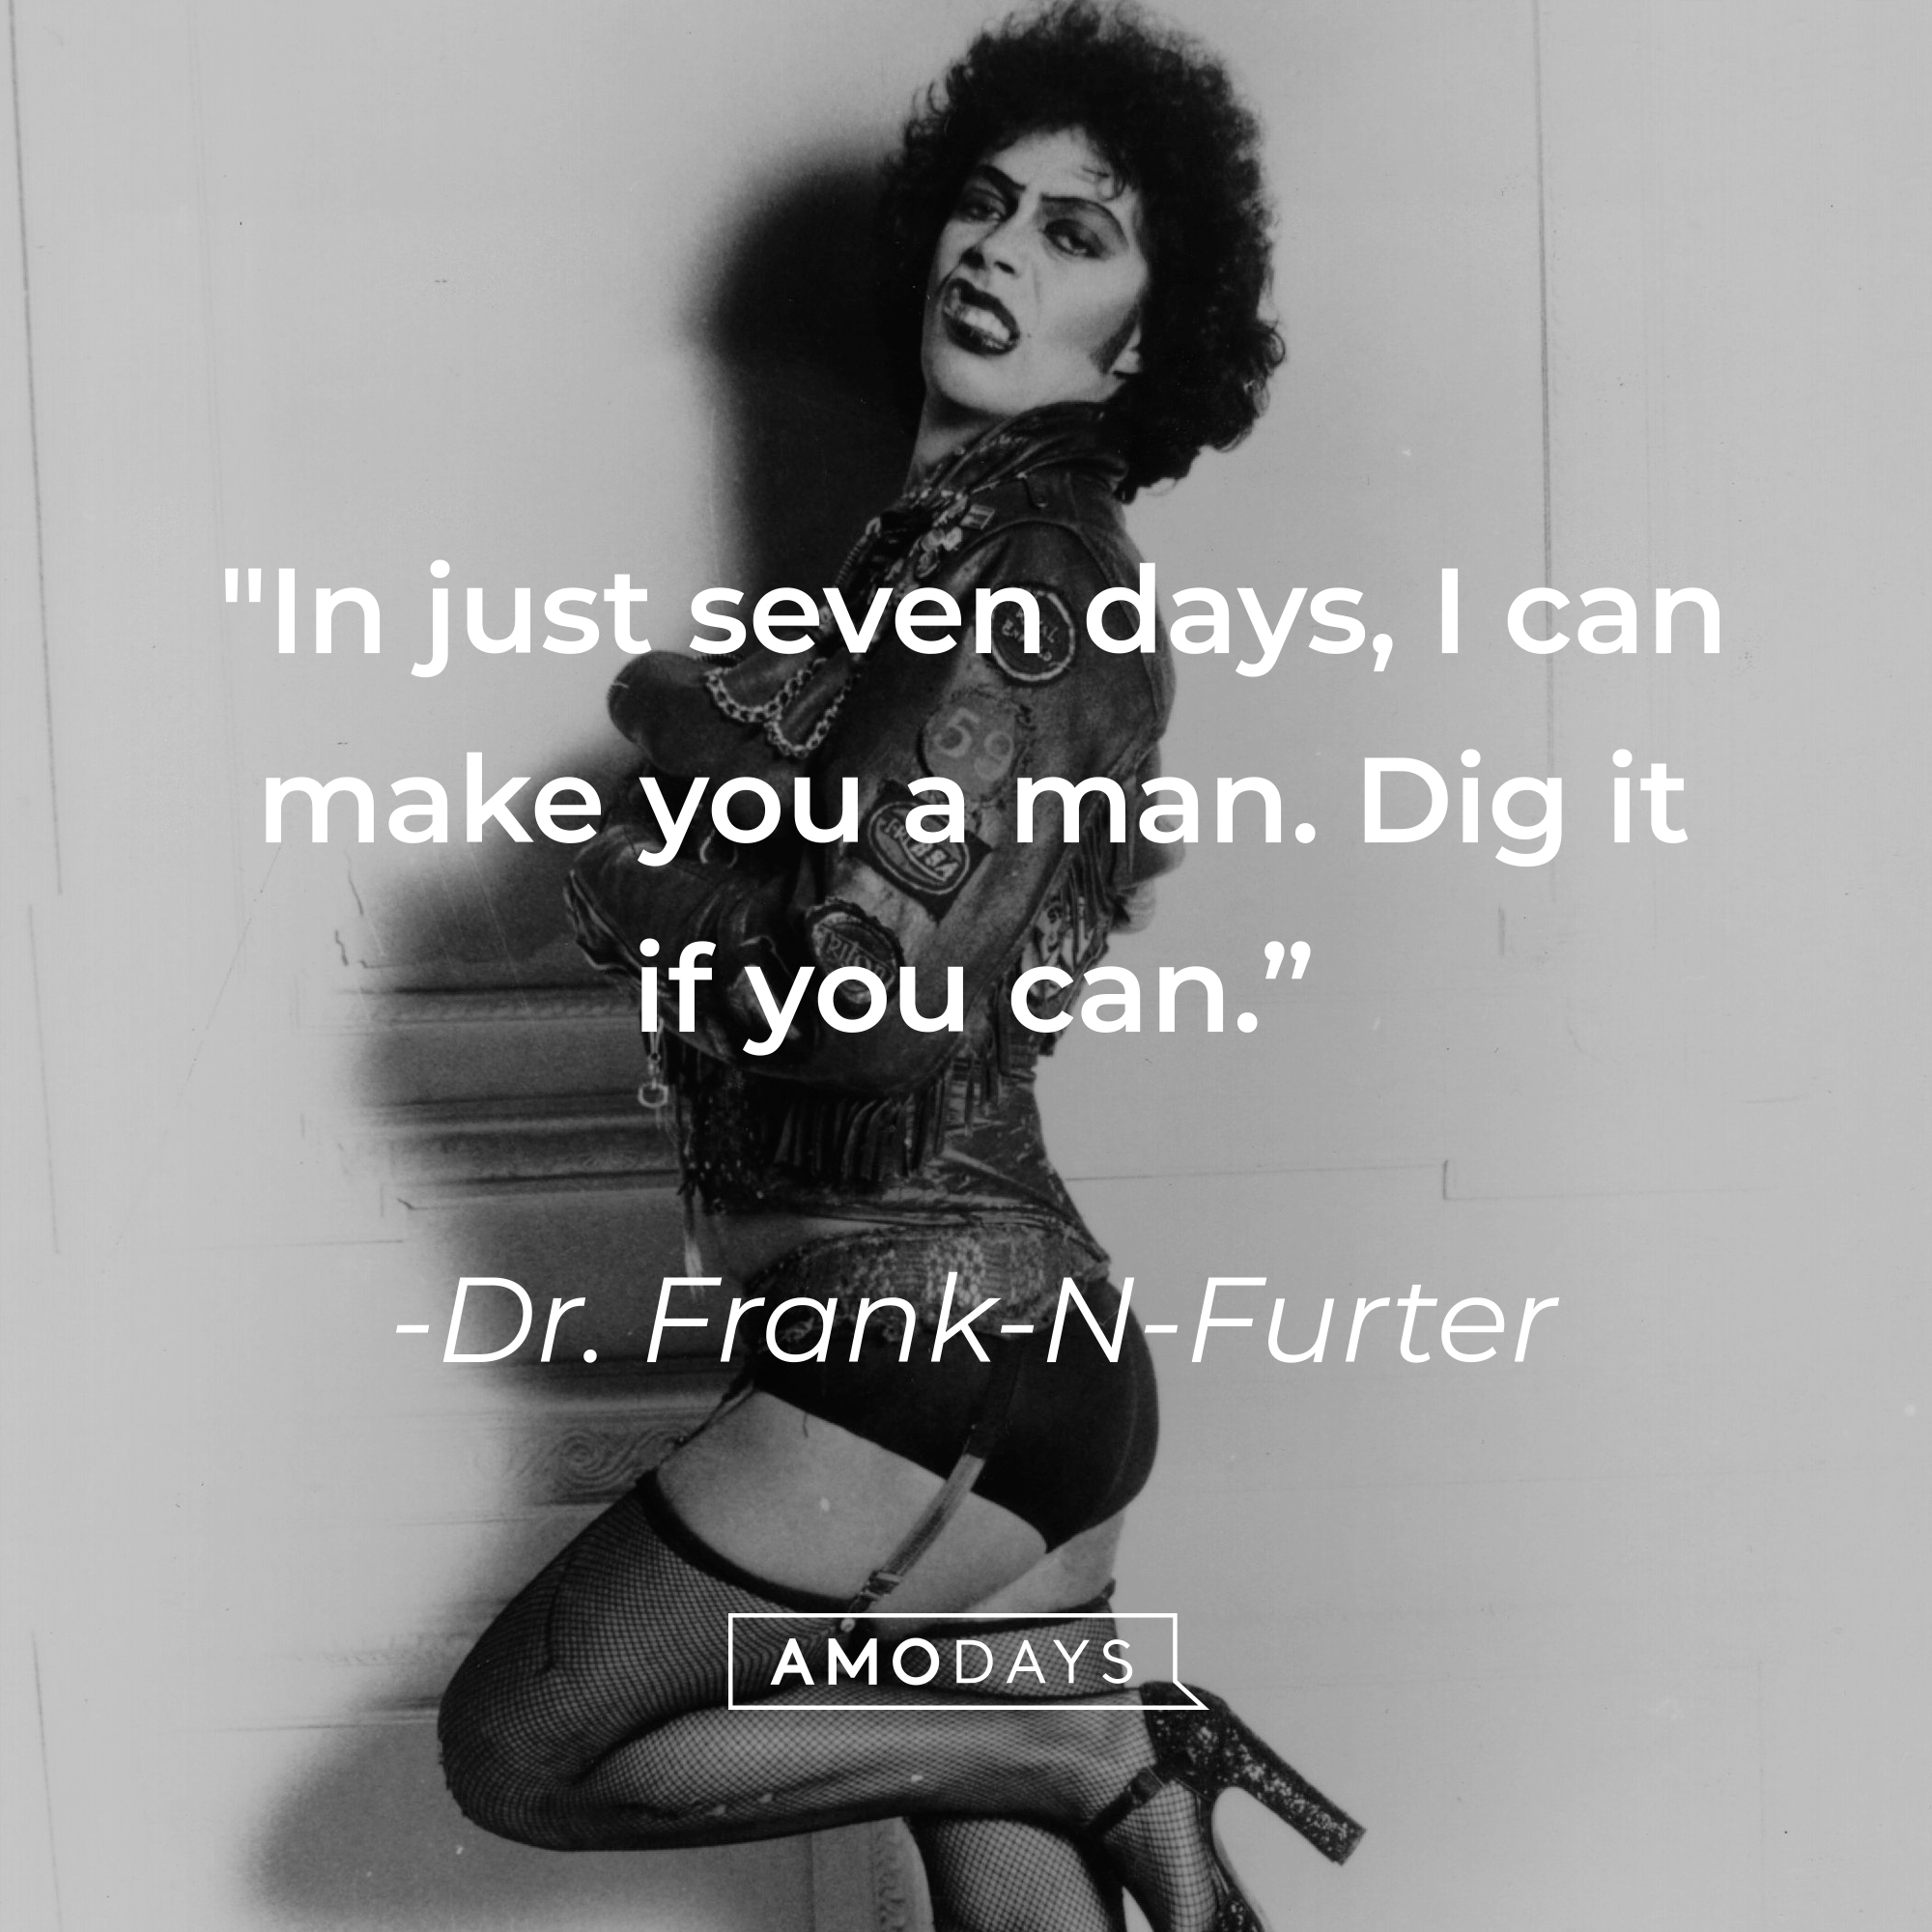 Dr. Frank-N-Furter's quote: "In just seven days, I can make you a man. Dig it if you can." | Source: Getty Images